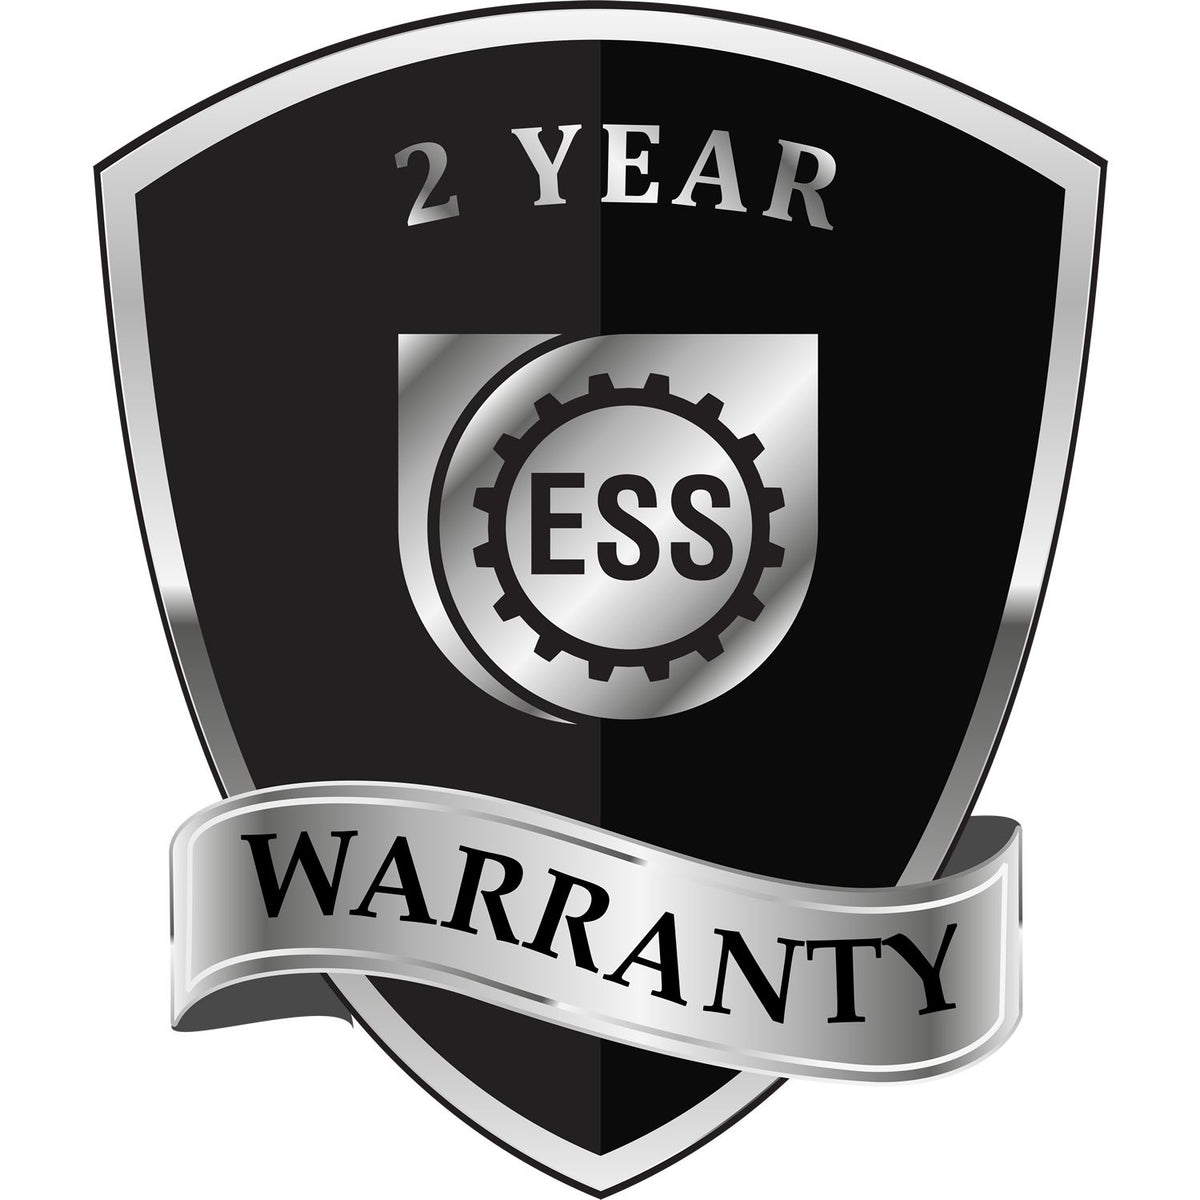 A badge or emblem showing a warranty icon for the State of Delaware Extended Long Reach Engineer Seal